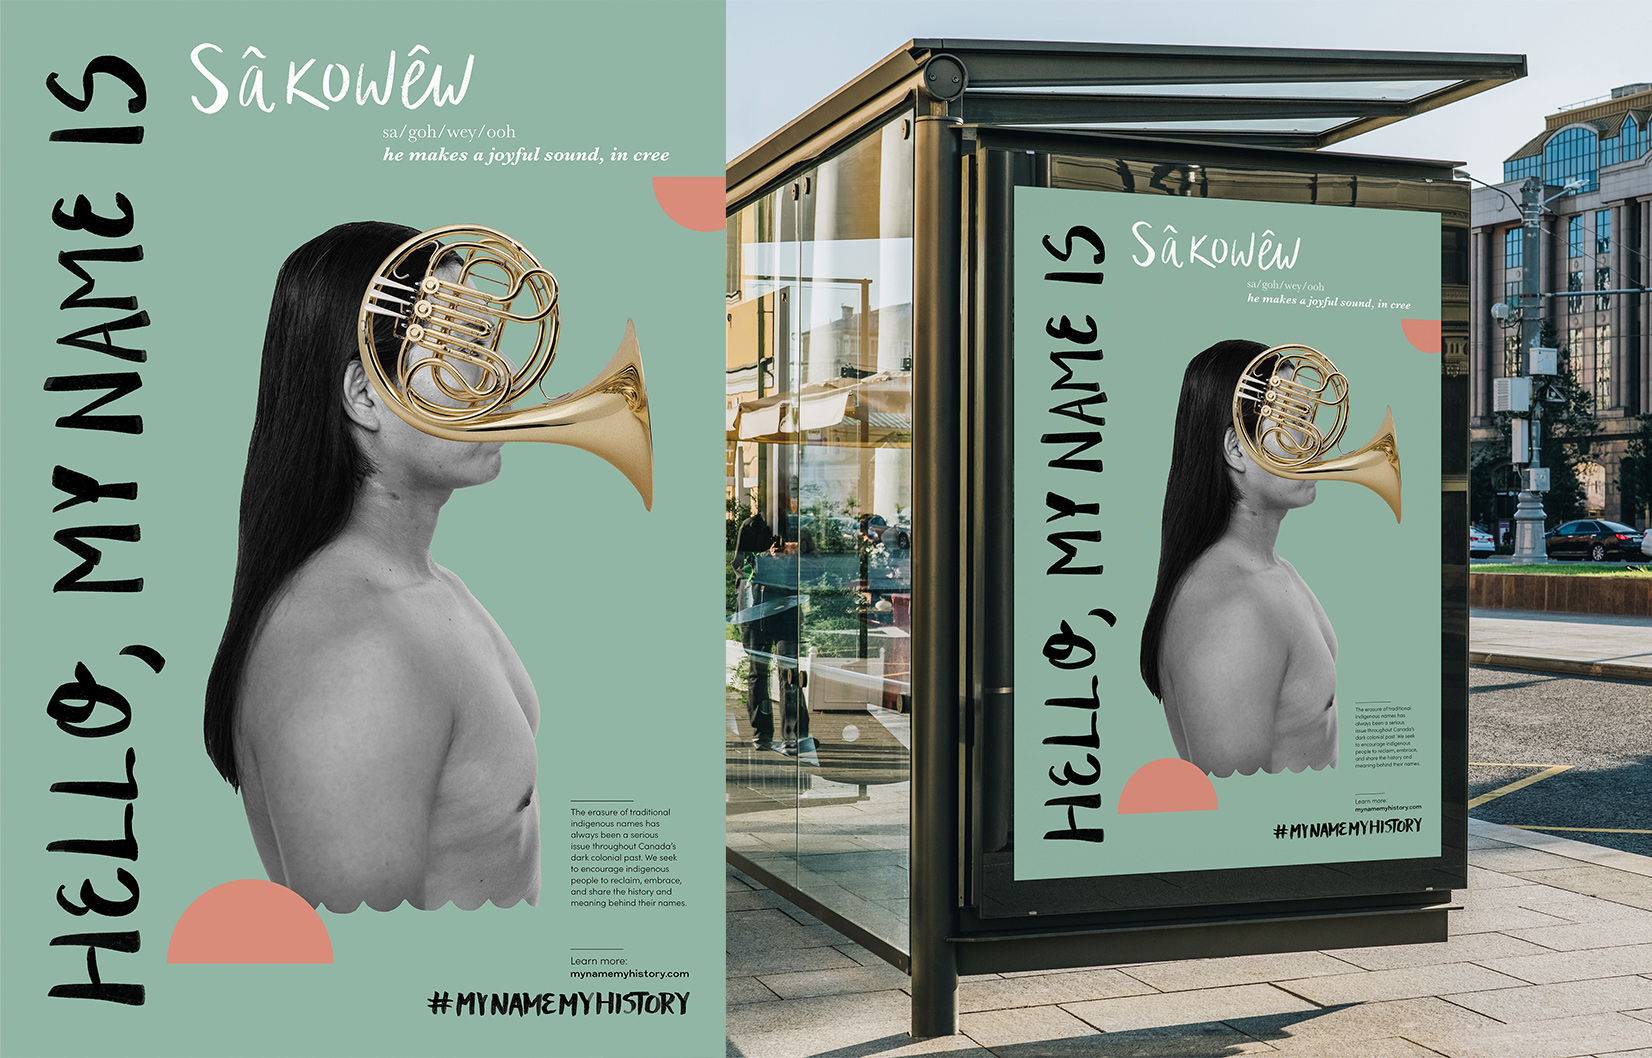 A poster of a cree man with a french horn covering his face. The same poster again, but applied on a bus shelter ad space.